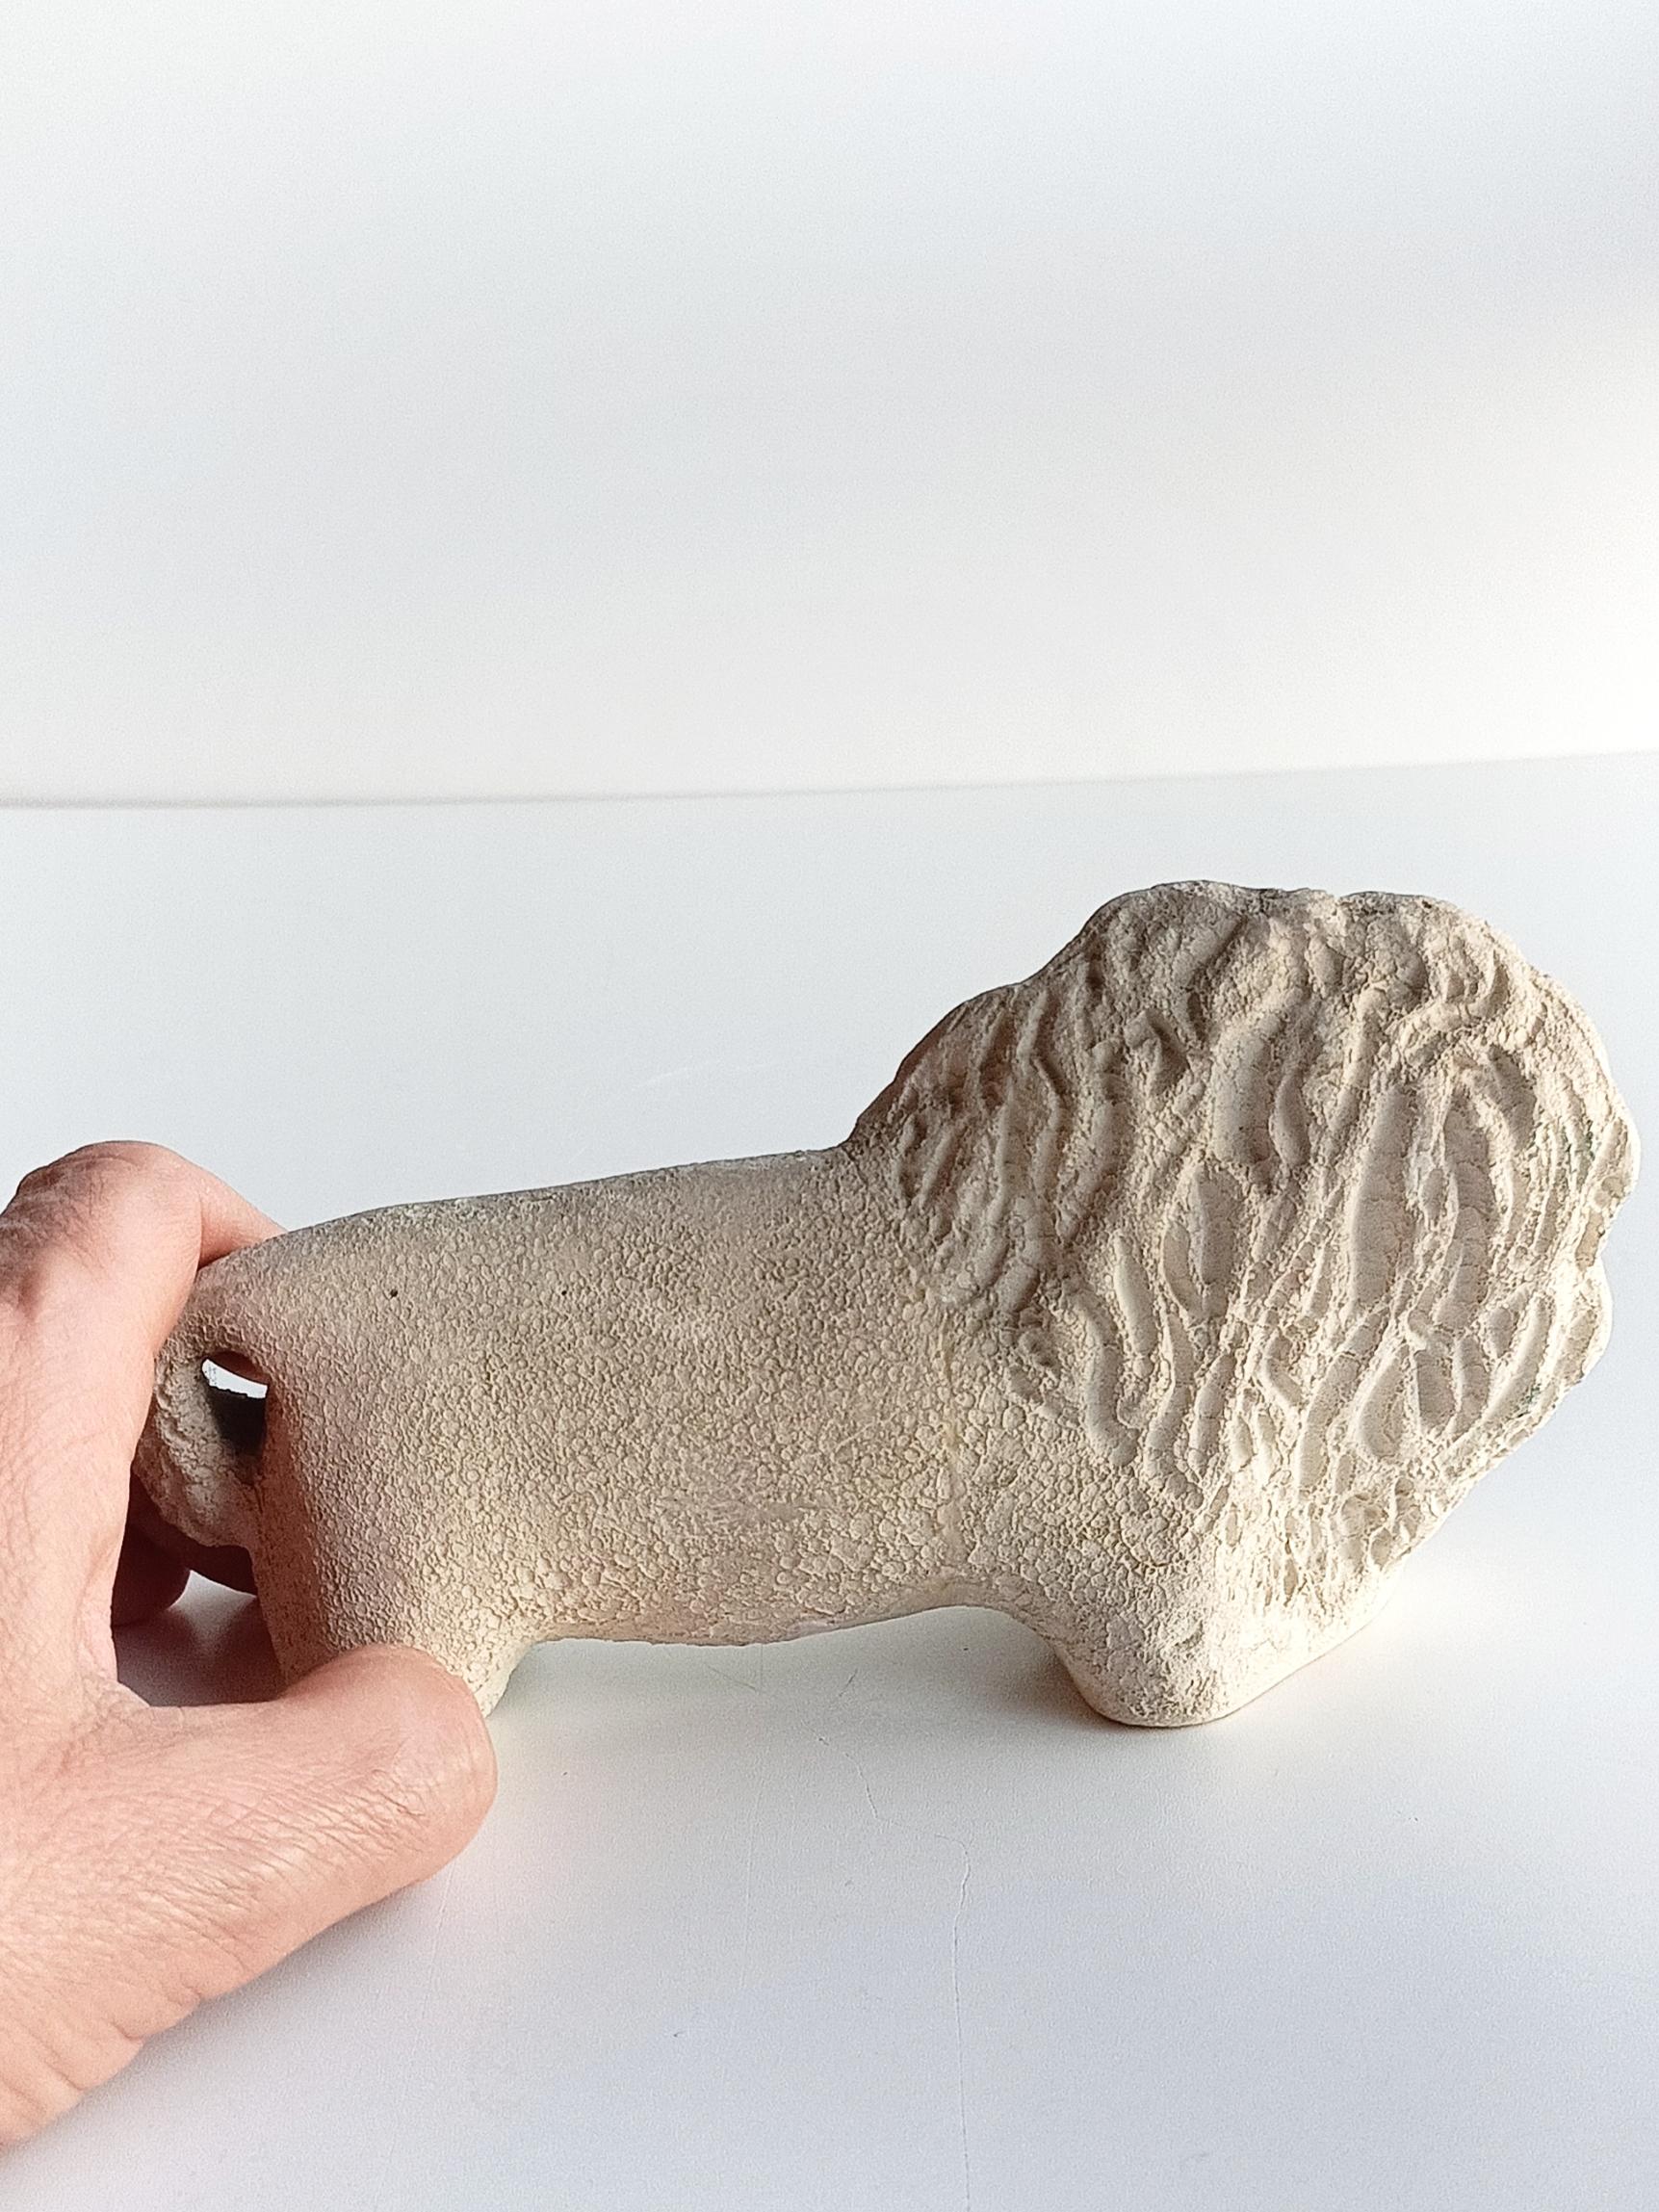 Hand-Crafted Bitossi by Aldo Londi Vintage Mid Century Ceramic Lion Sculpture, Italy, 1960s For Sale